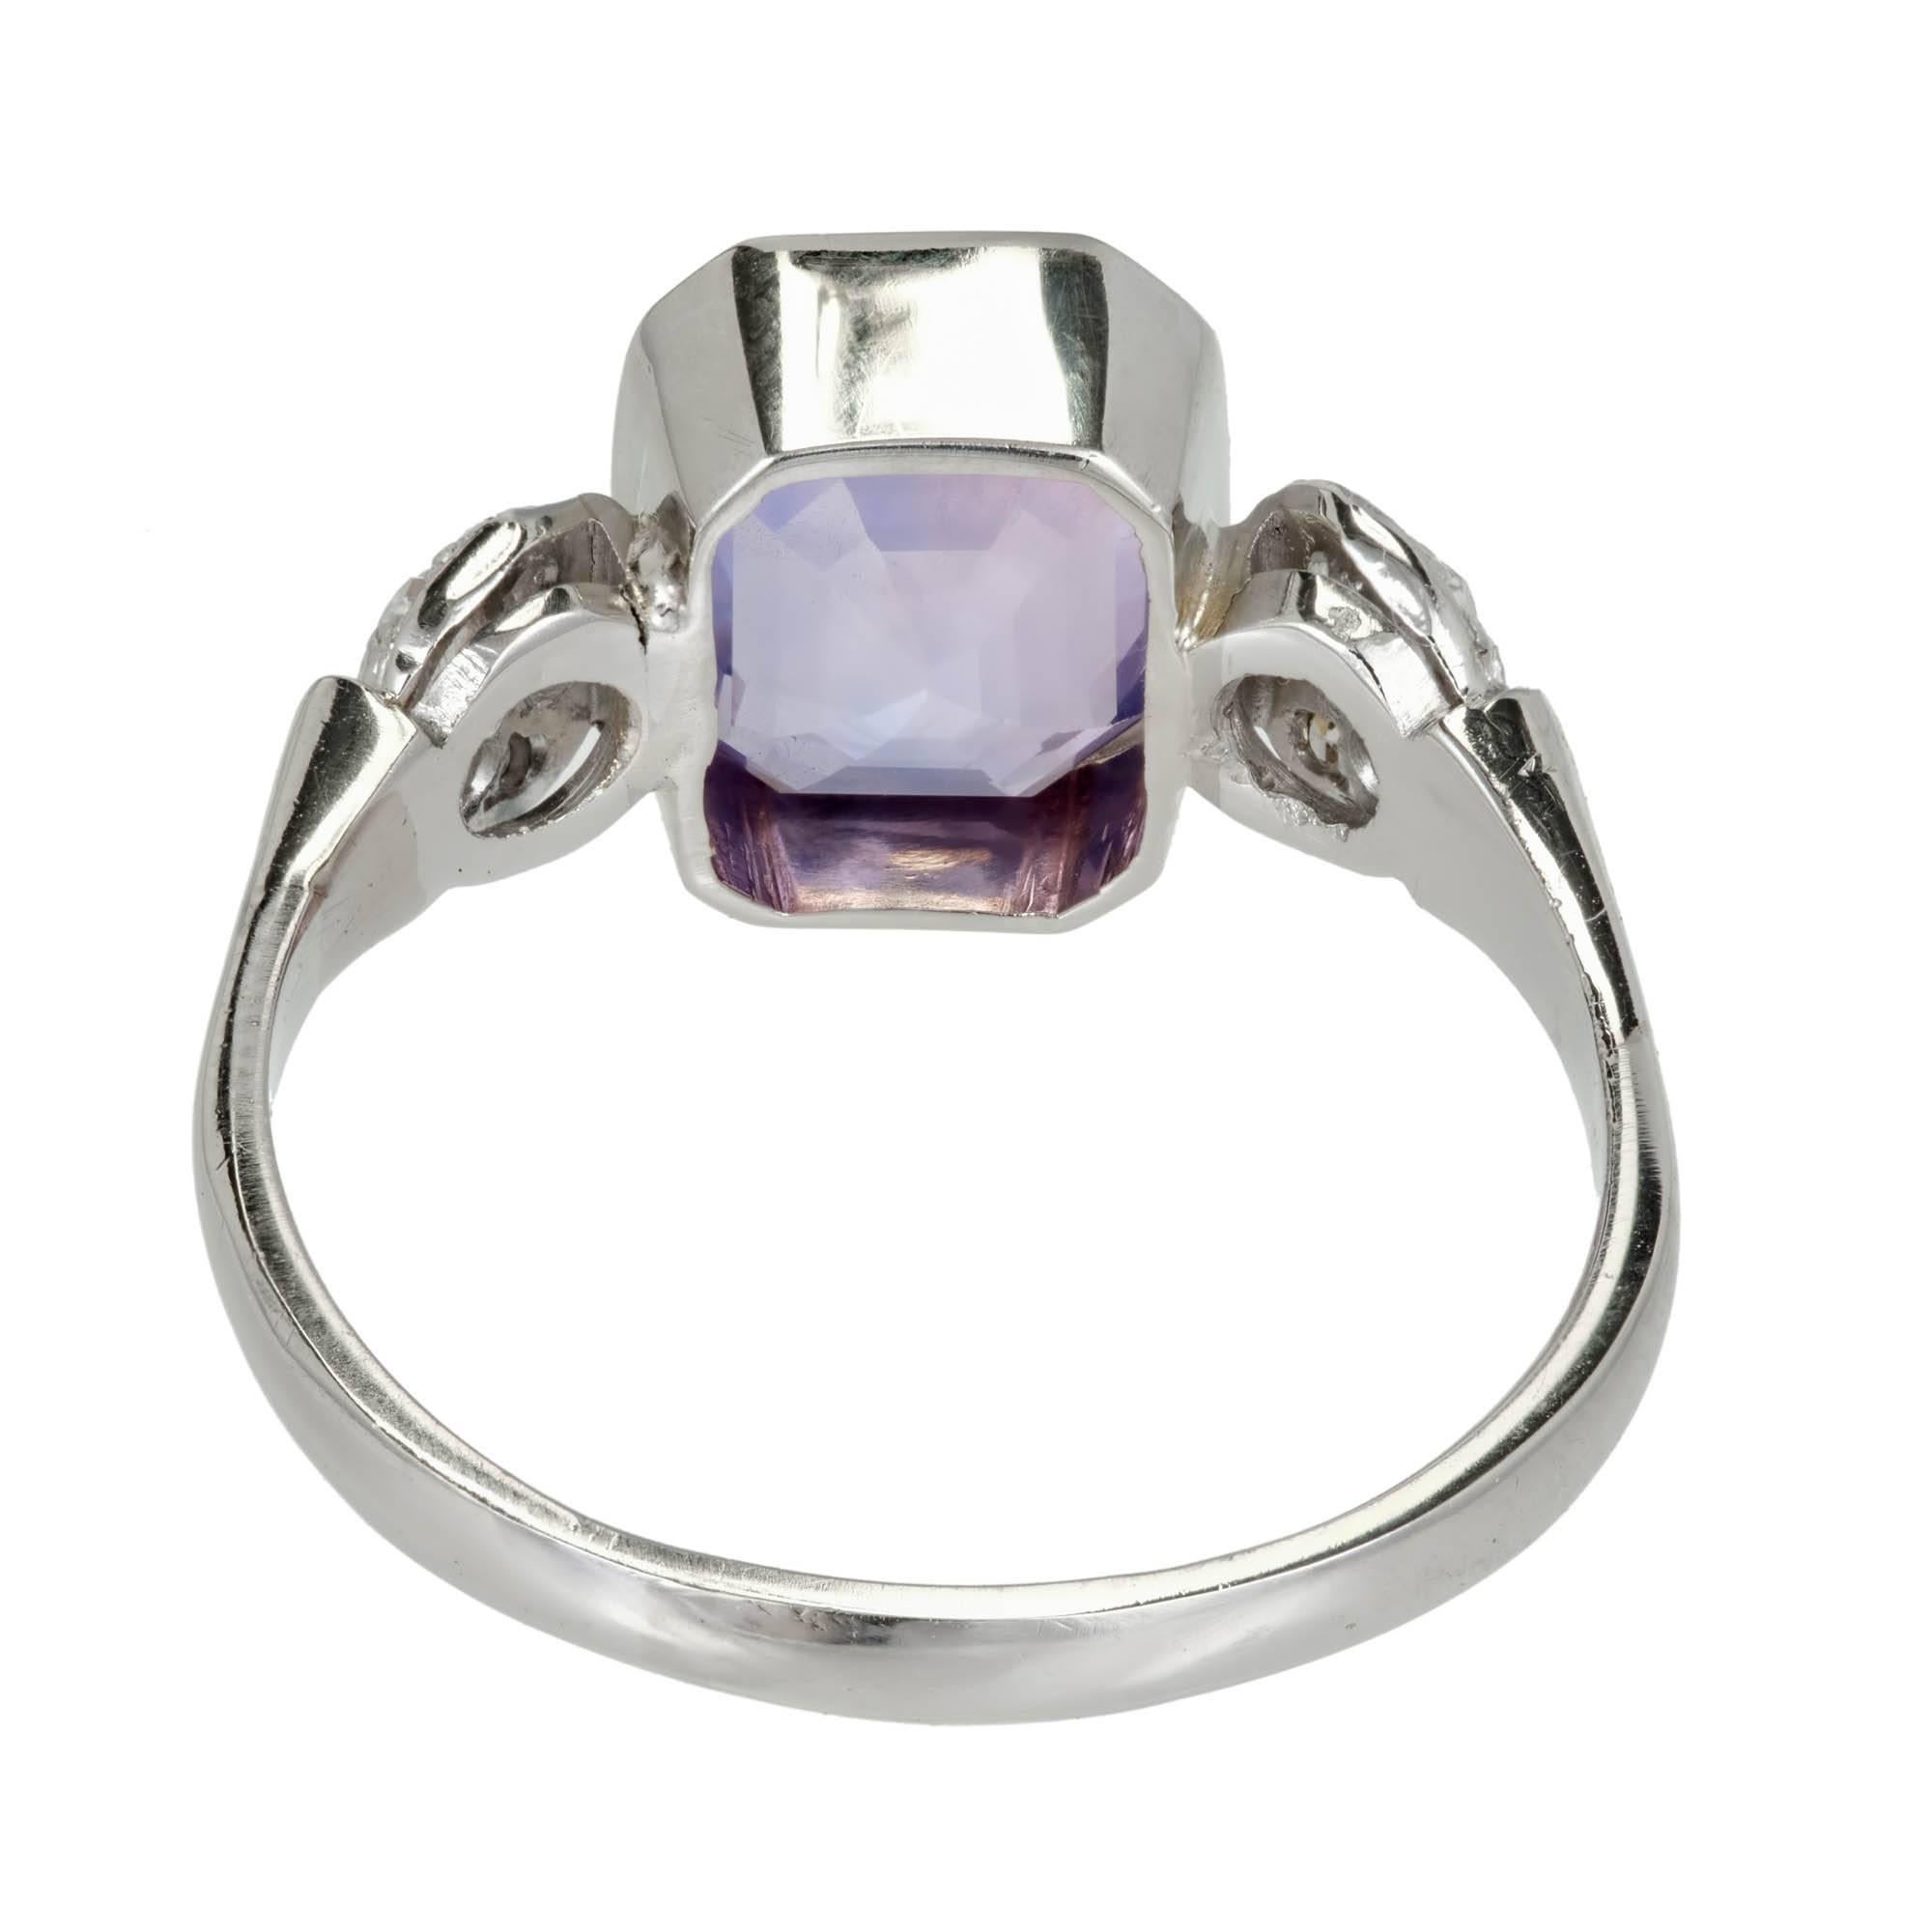 2.78 Carat Purple Octagon Sapphire Diamond Platinum Engagement Ring In Good Condition For Sale In Stamford, CT